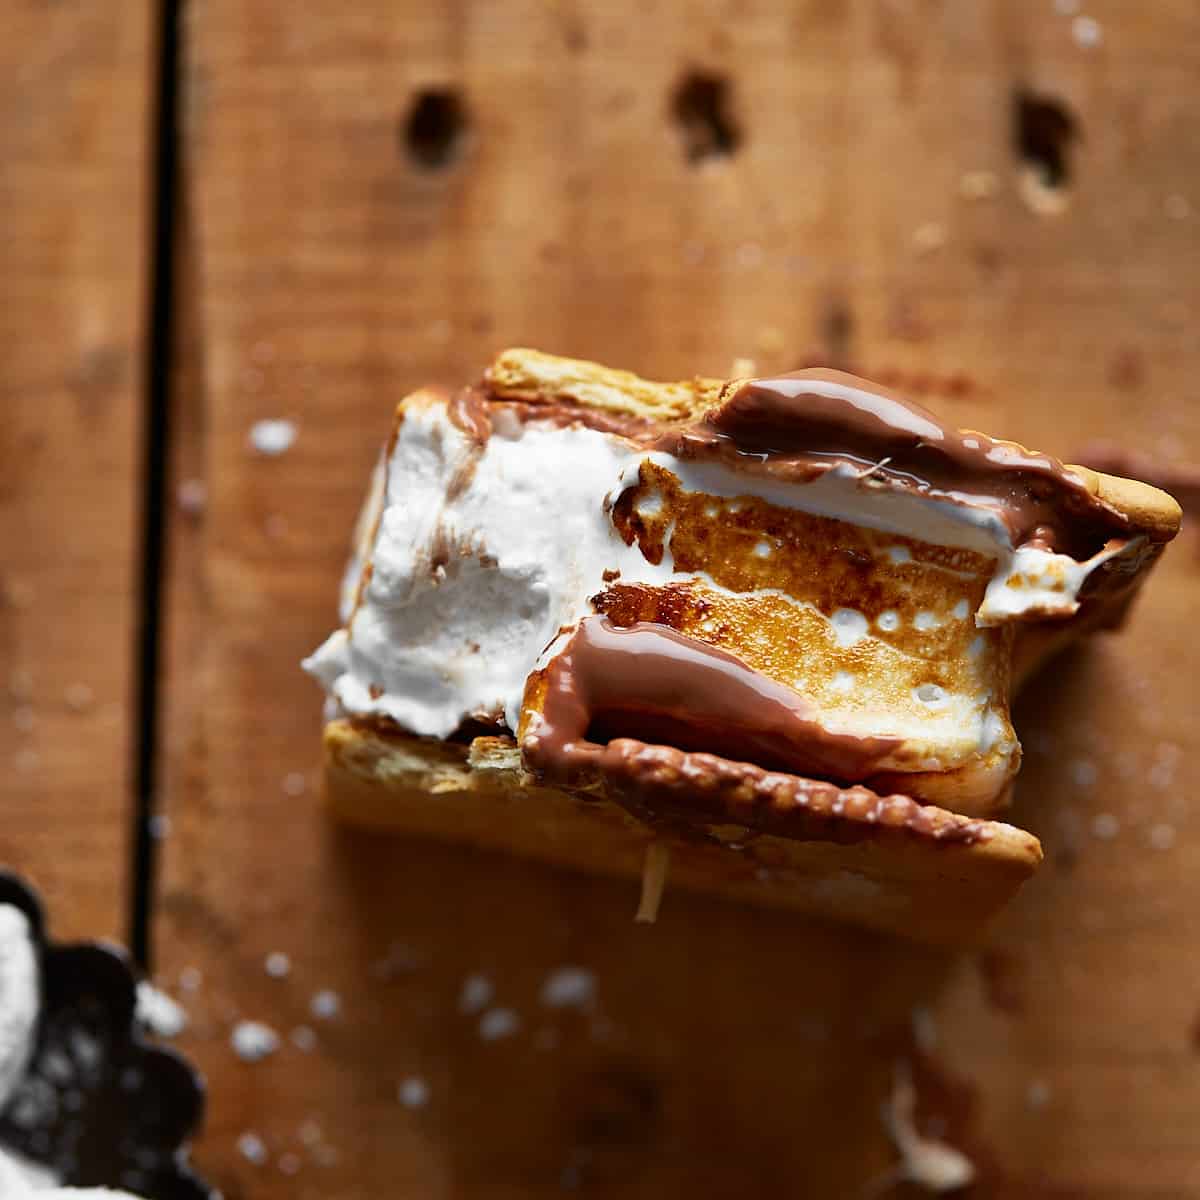 Bitten s'mores on a wooden background